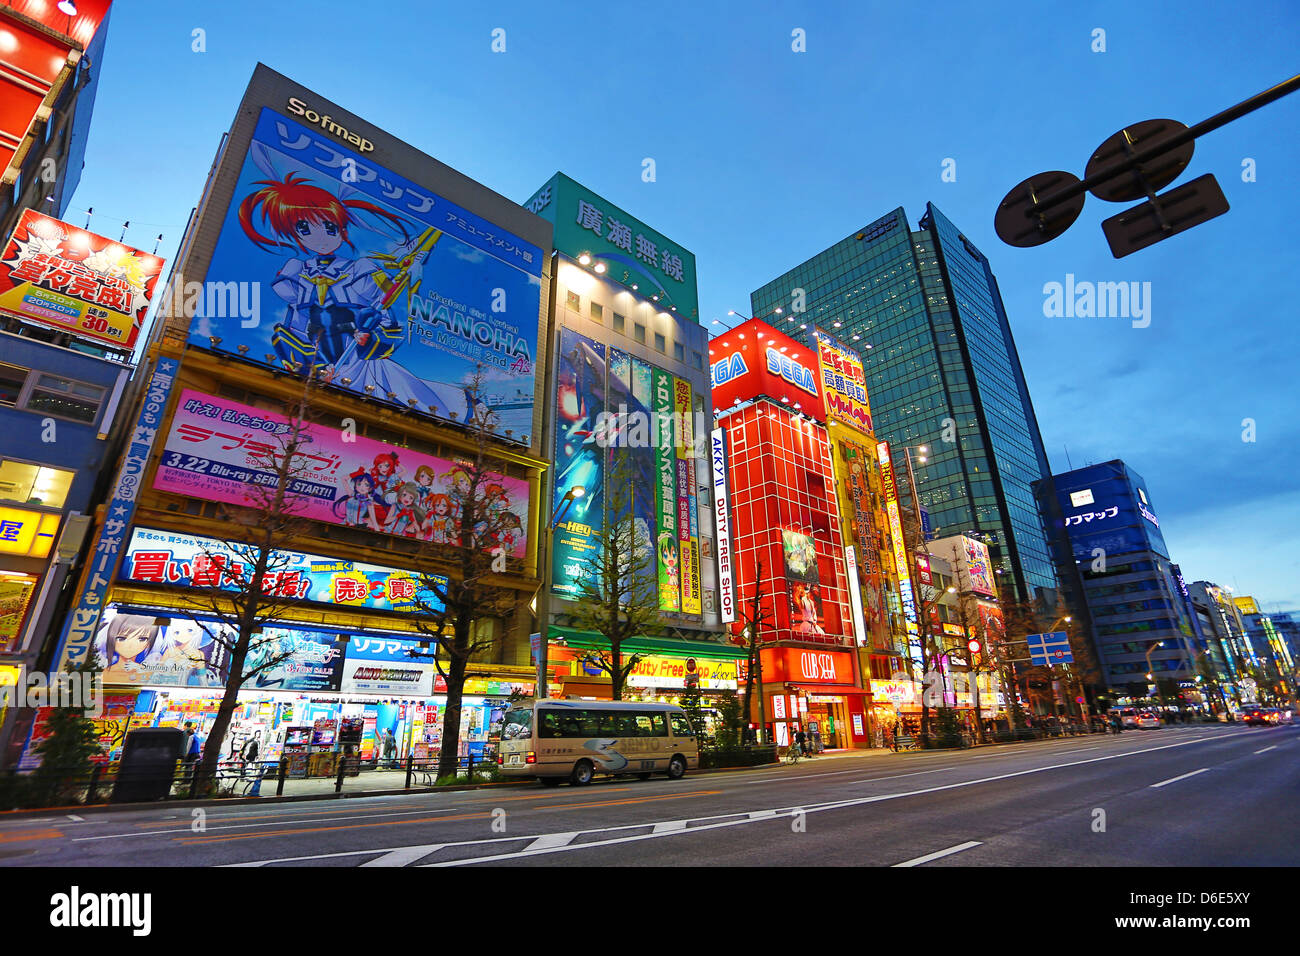 Night scene of buildings, signs and lights in the street in Akihabara, Electric Town, Tokyo, Japan Stock Photo